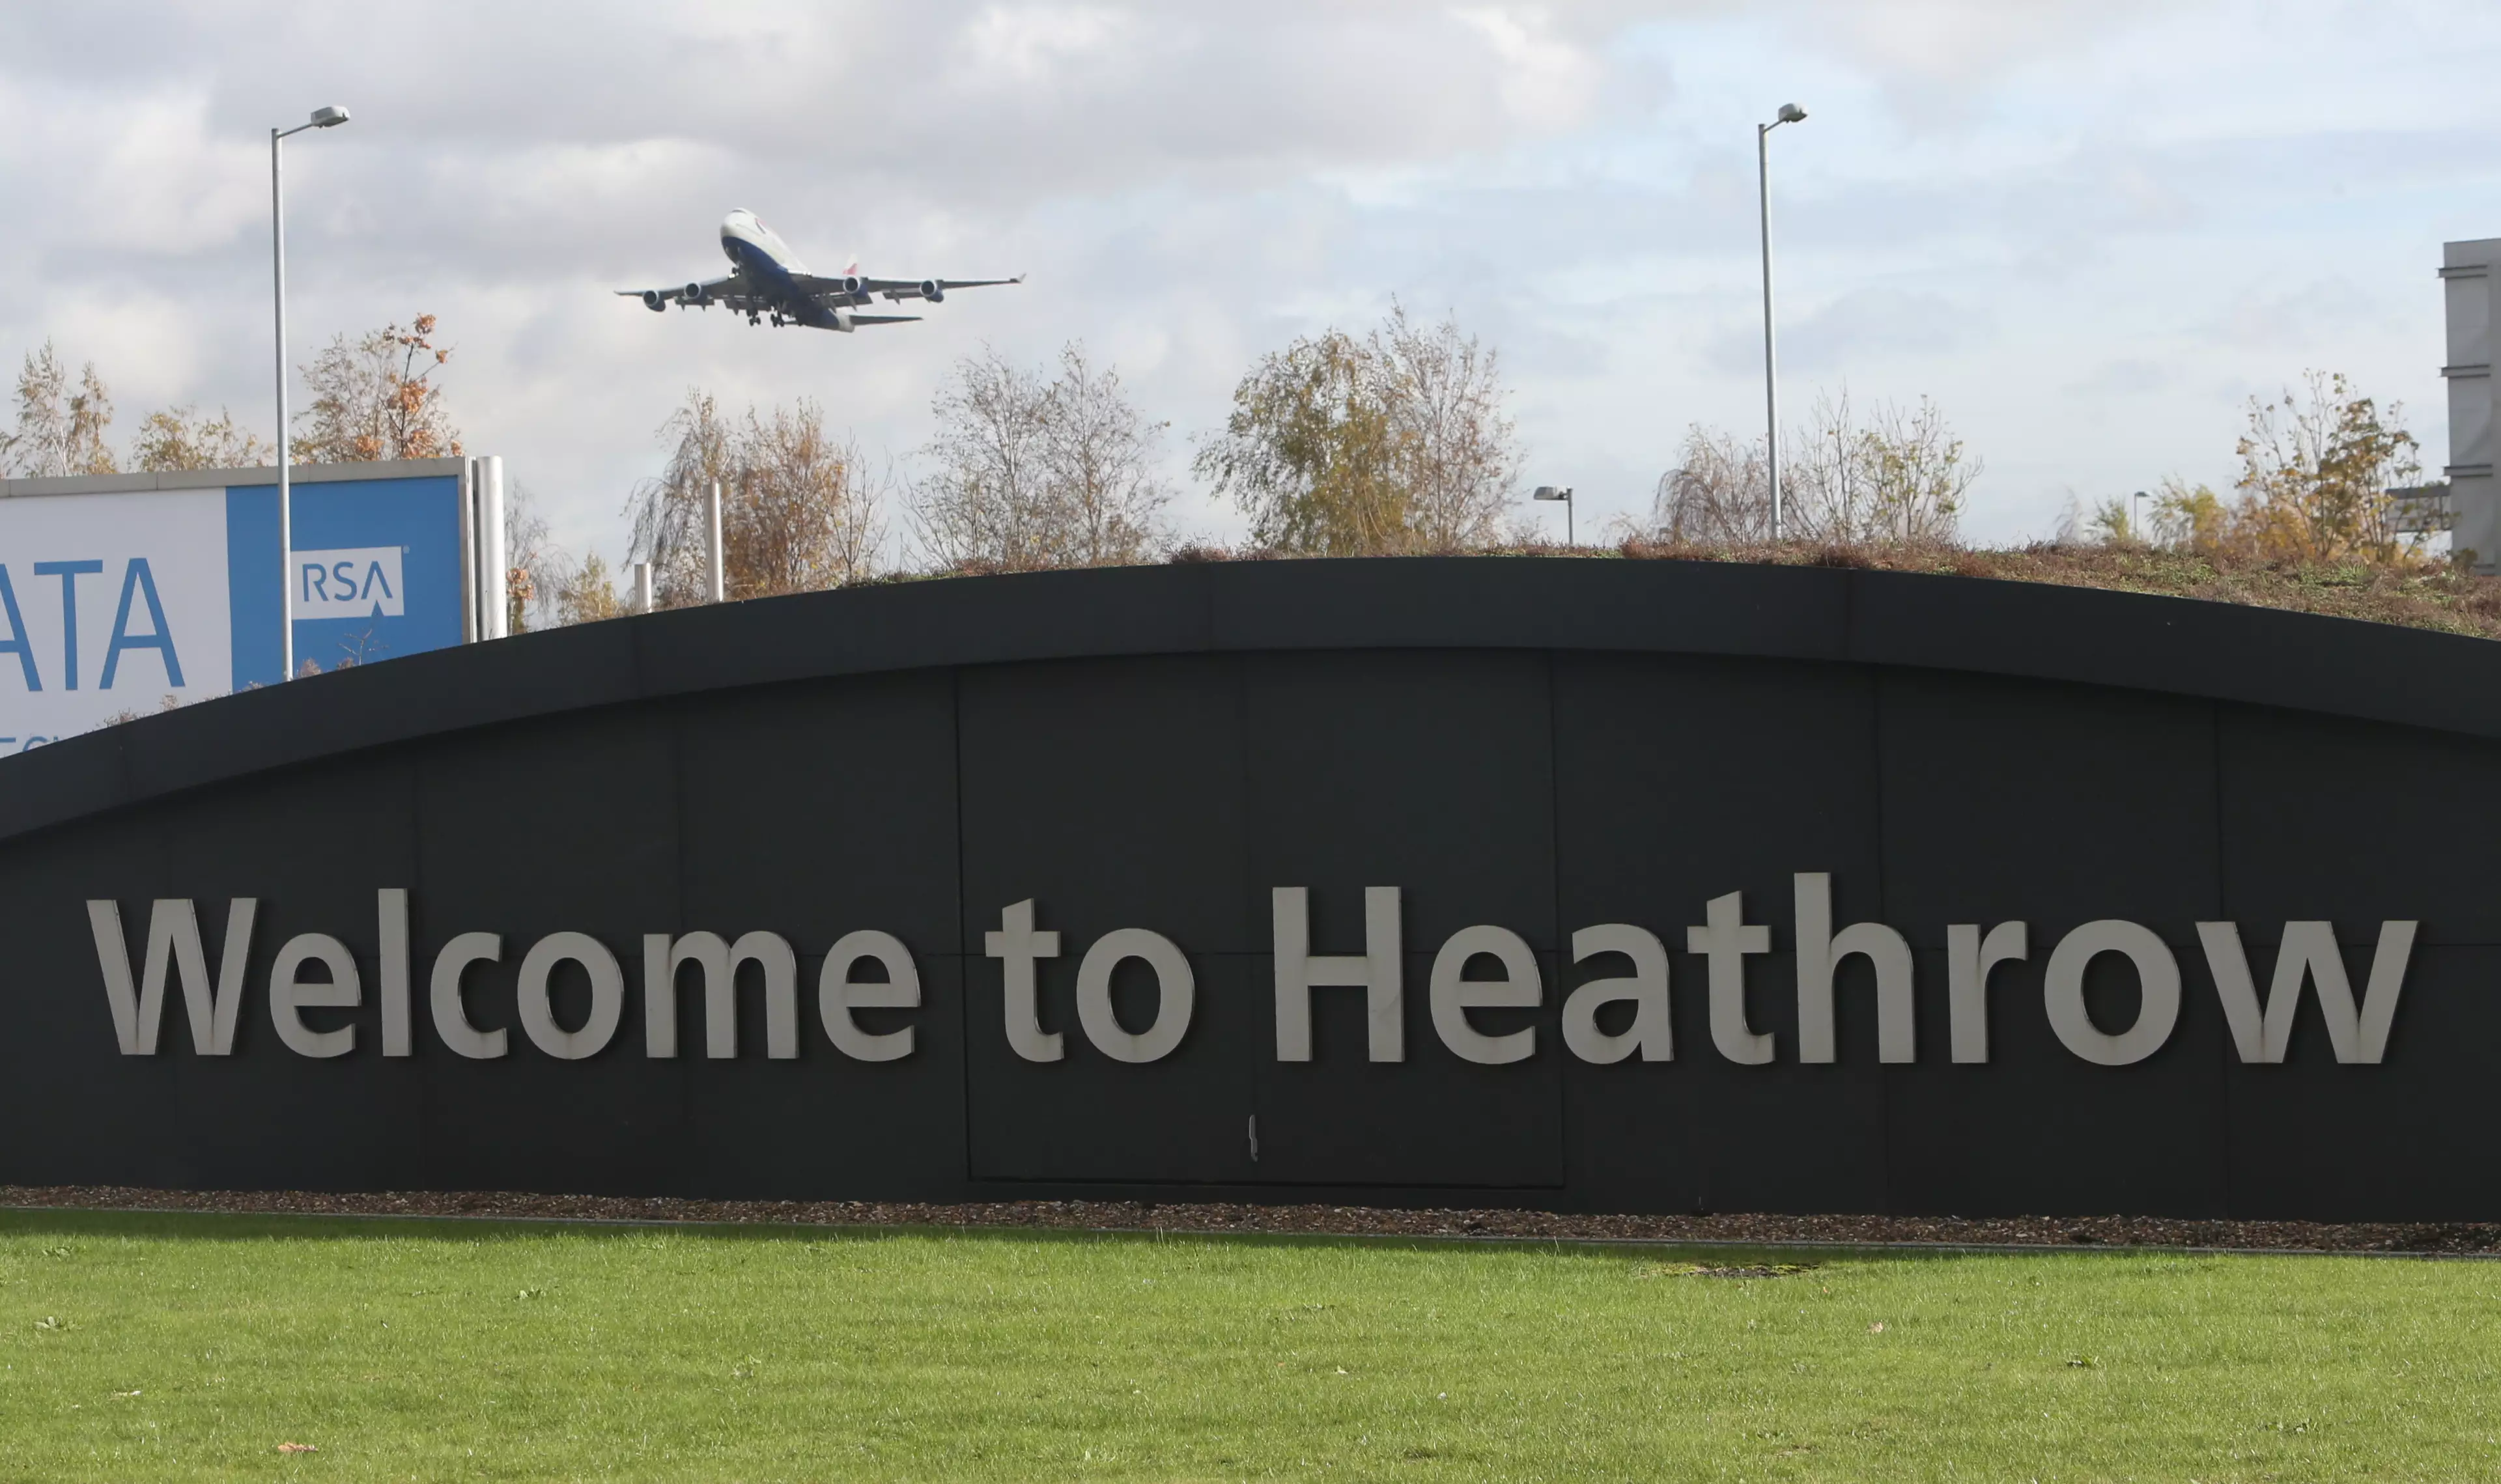 The plane was descending to land at Heathrow Airport.